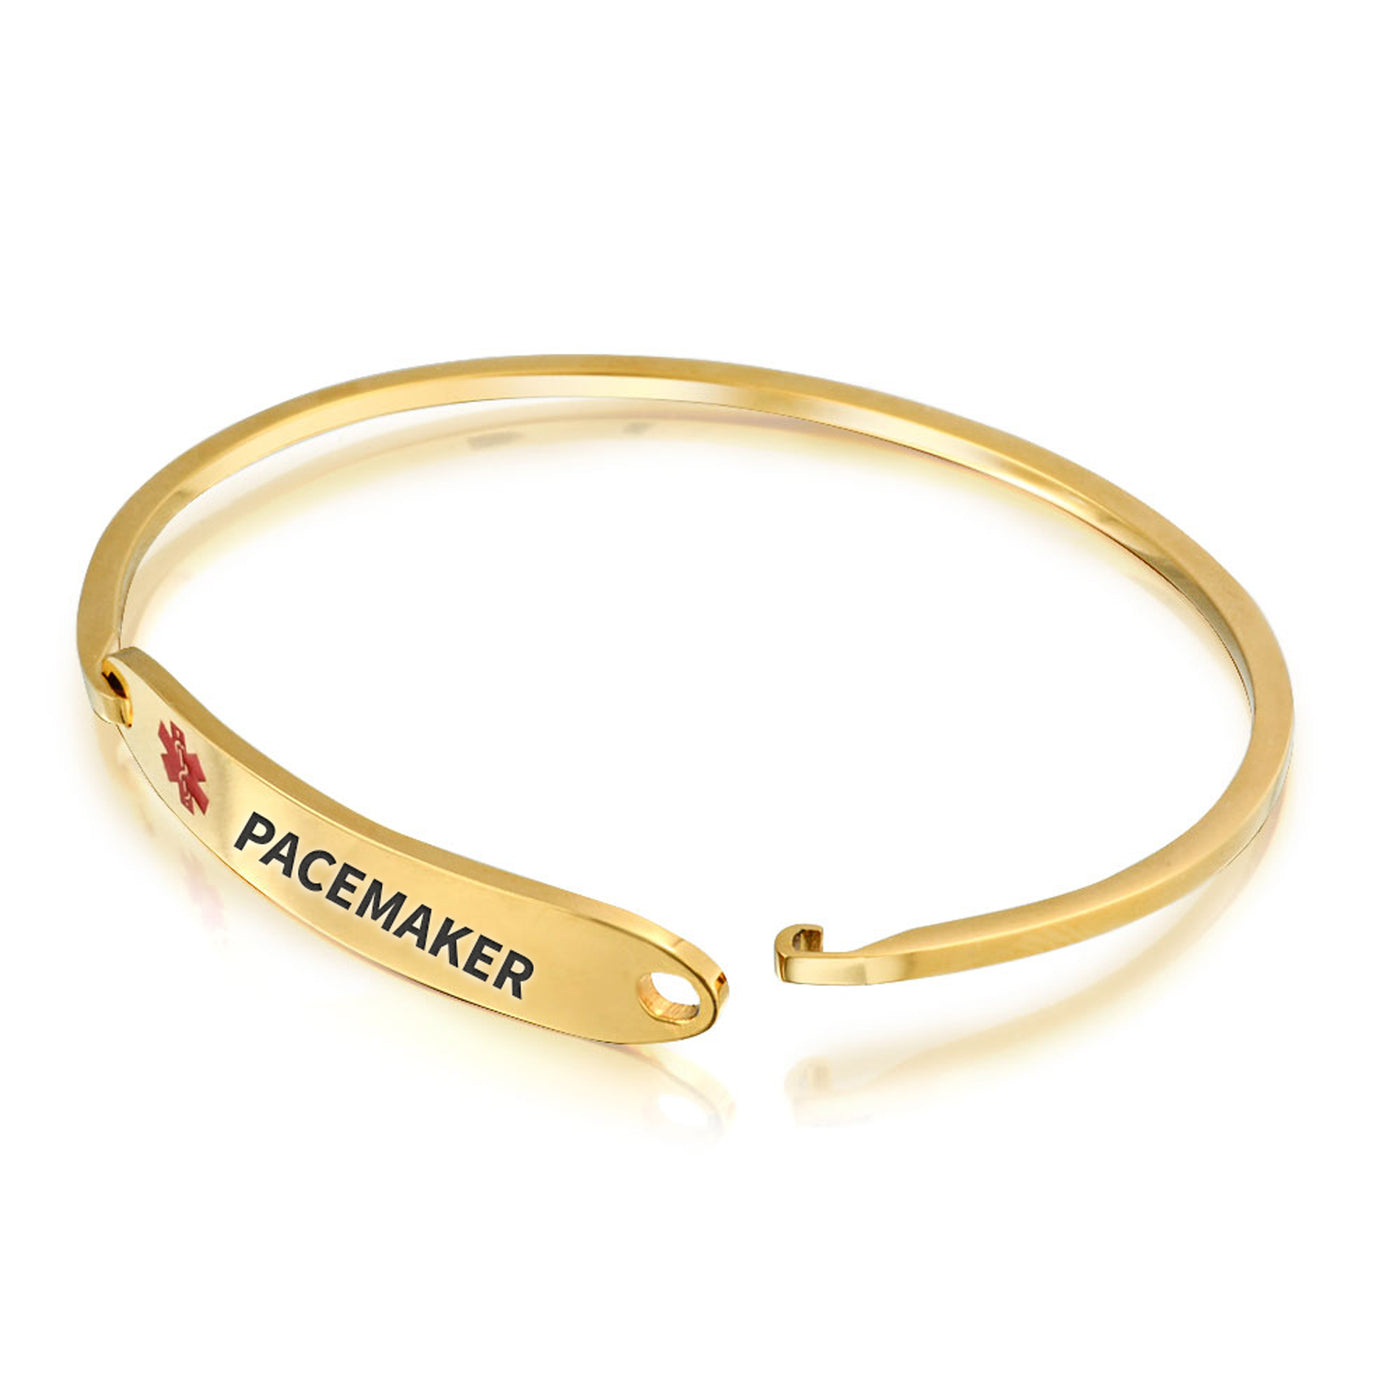 Gold Pacemaker